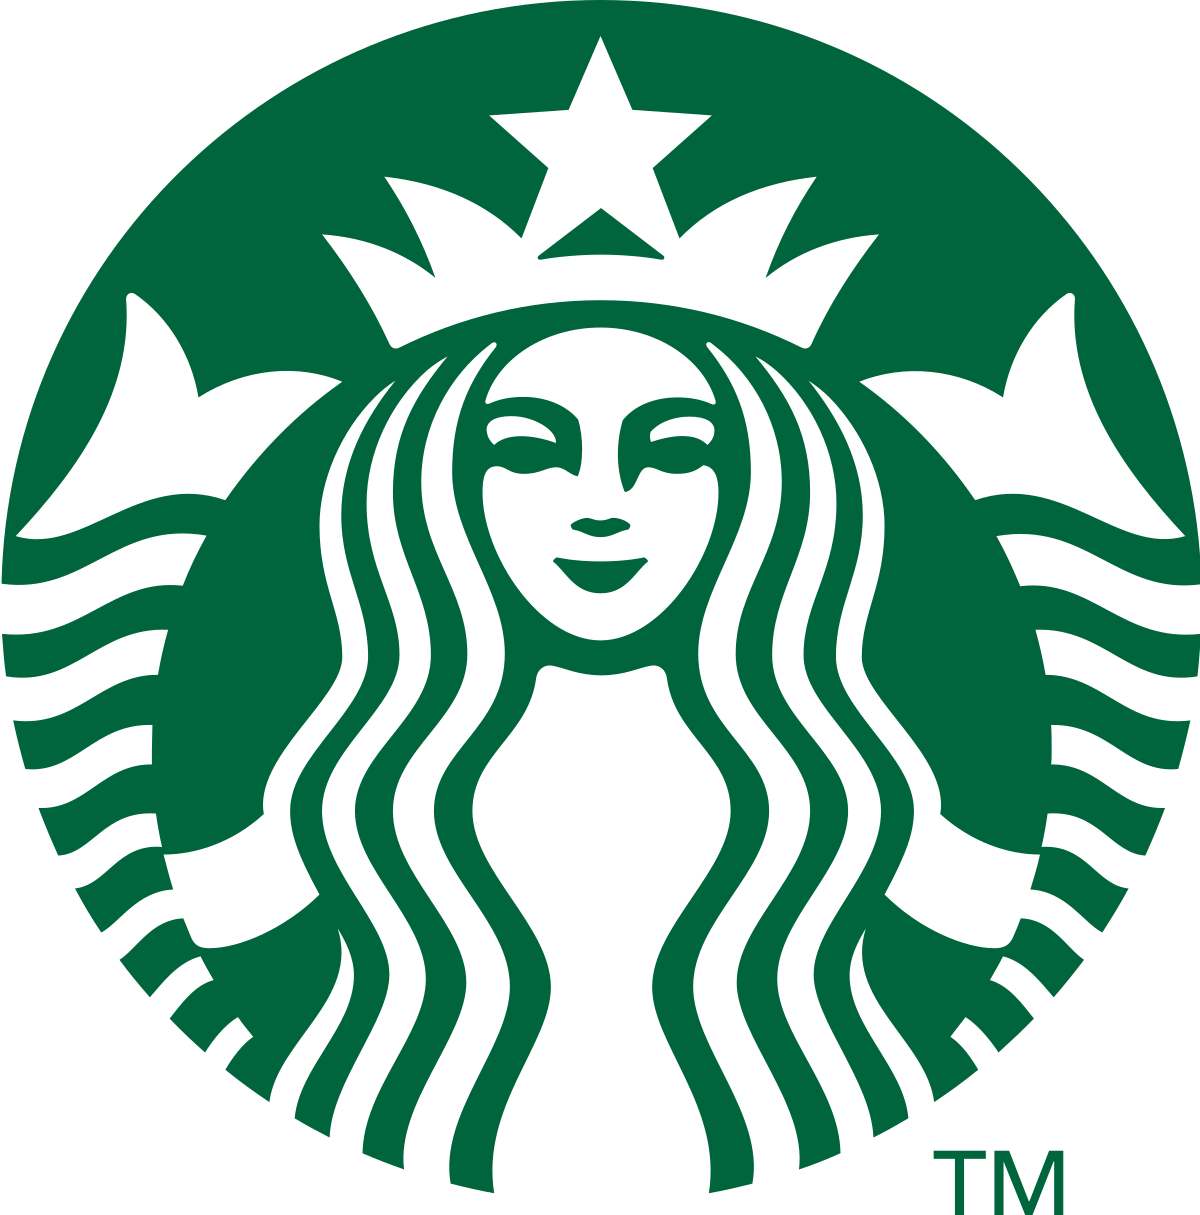 Starbucks - Spend $5+ using PayPal by 4/30/22, get Coupon for Free Reusable Cup by 5/7/22 YMMV